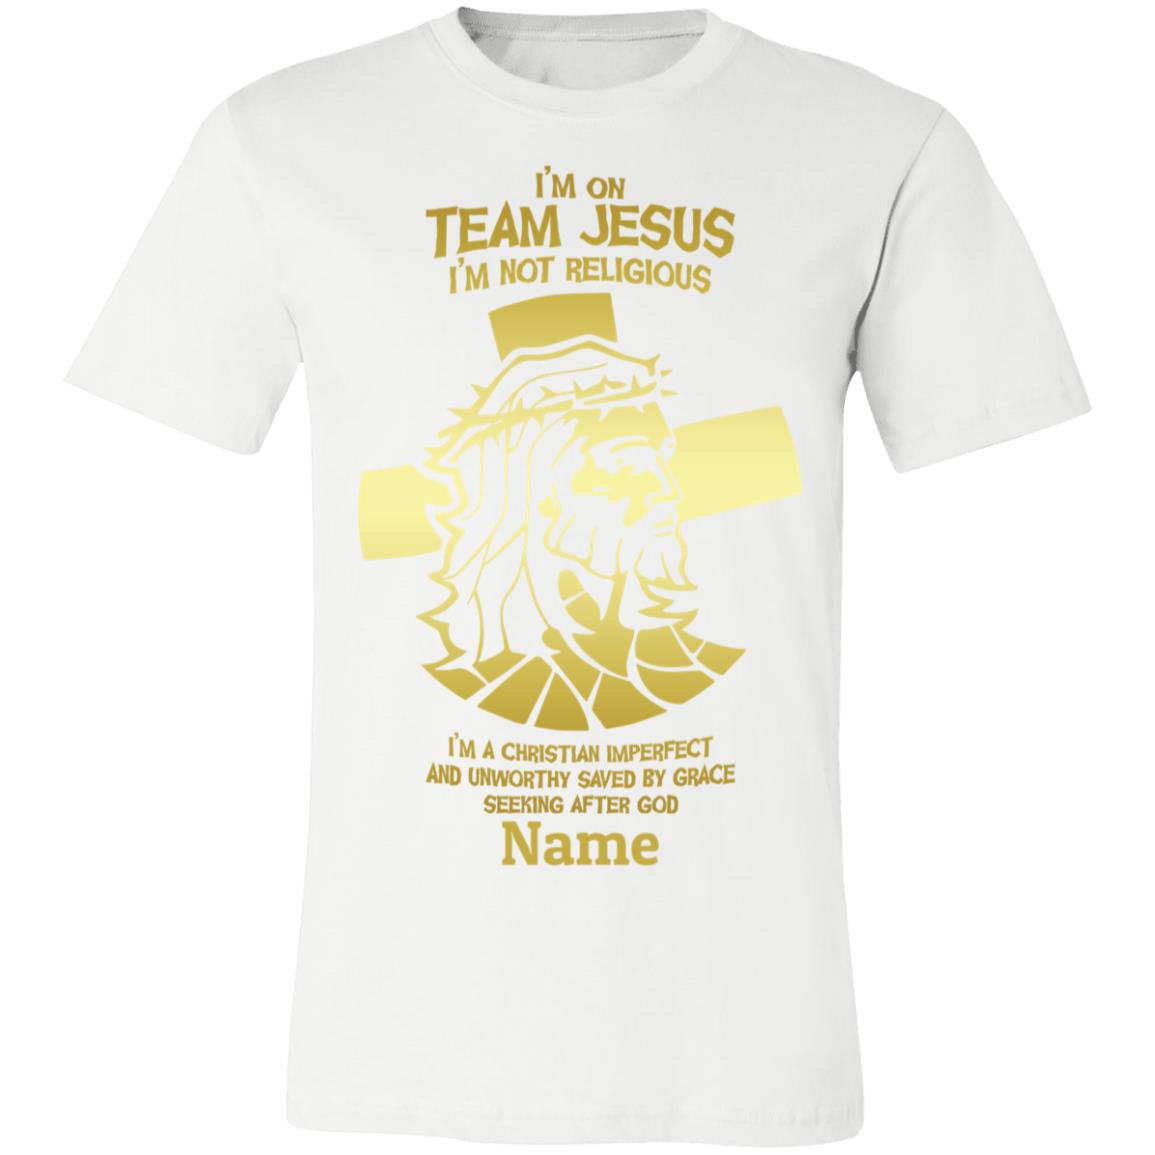 T-Shirts - Personalized Christian Themed T-shirts -  I'm On Team Jesus